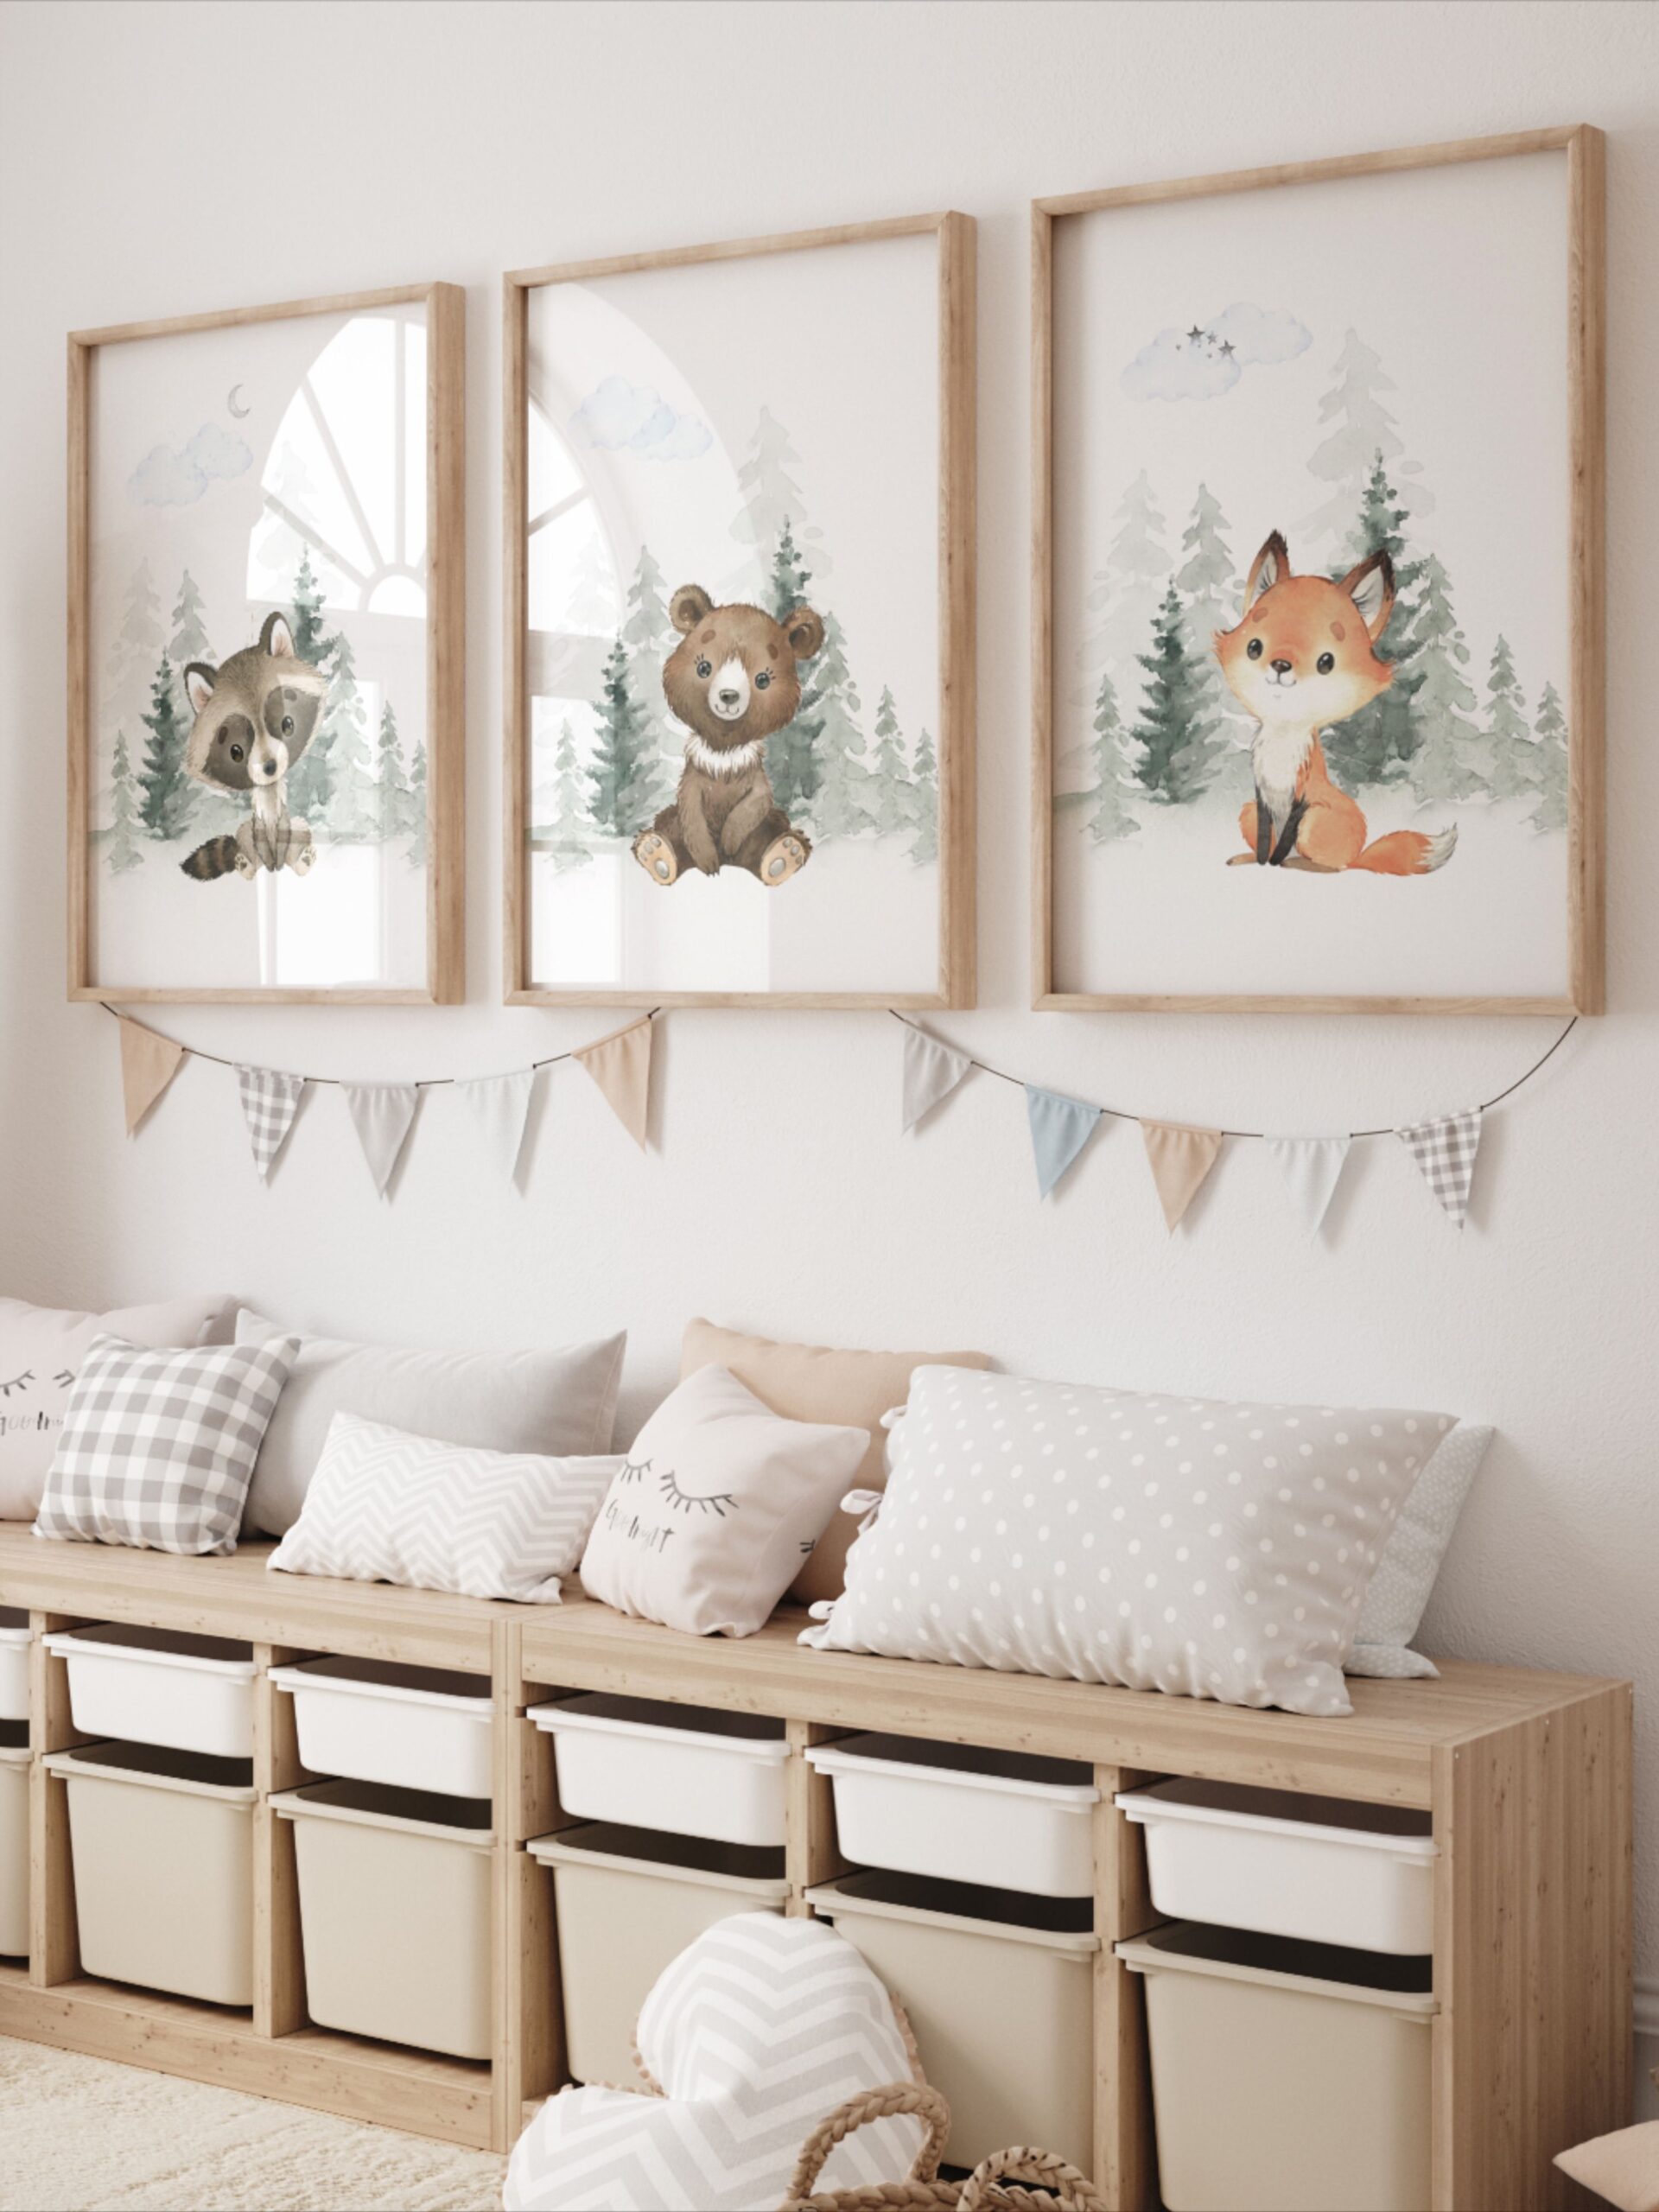 Enchanting Woodland Nursery Decor for a
Soothing Baby Room